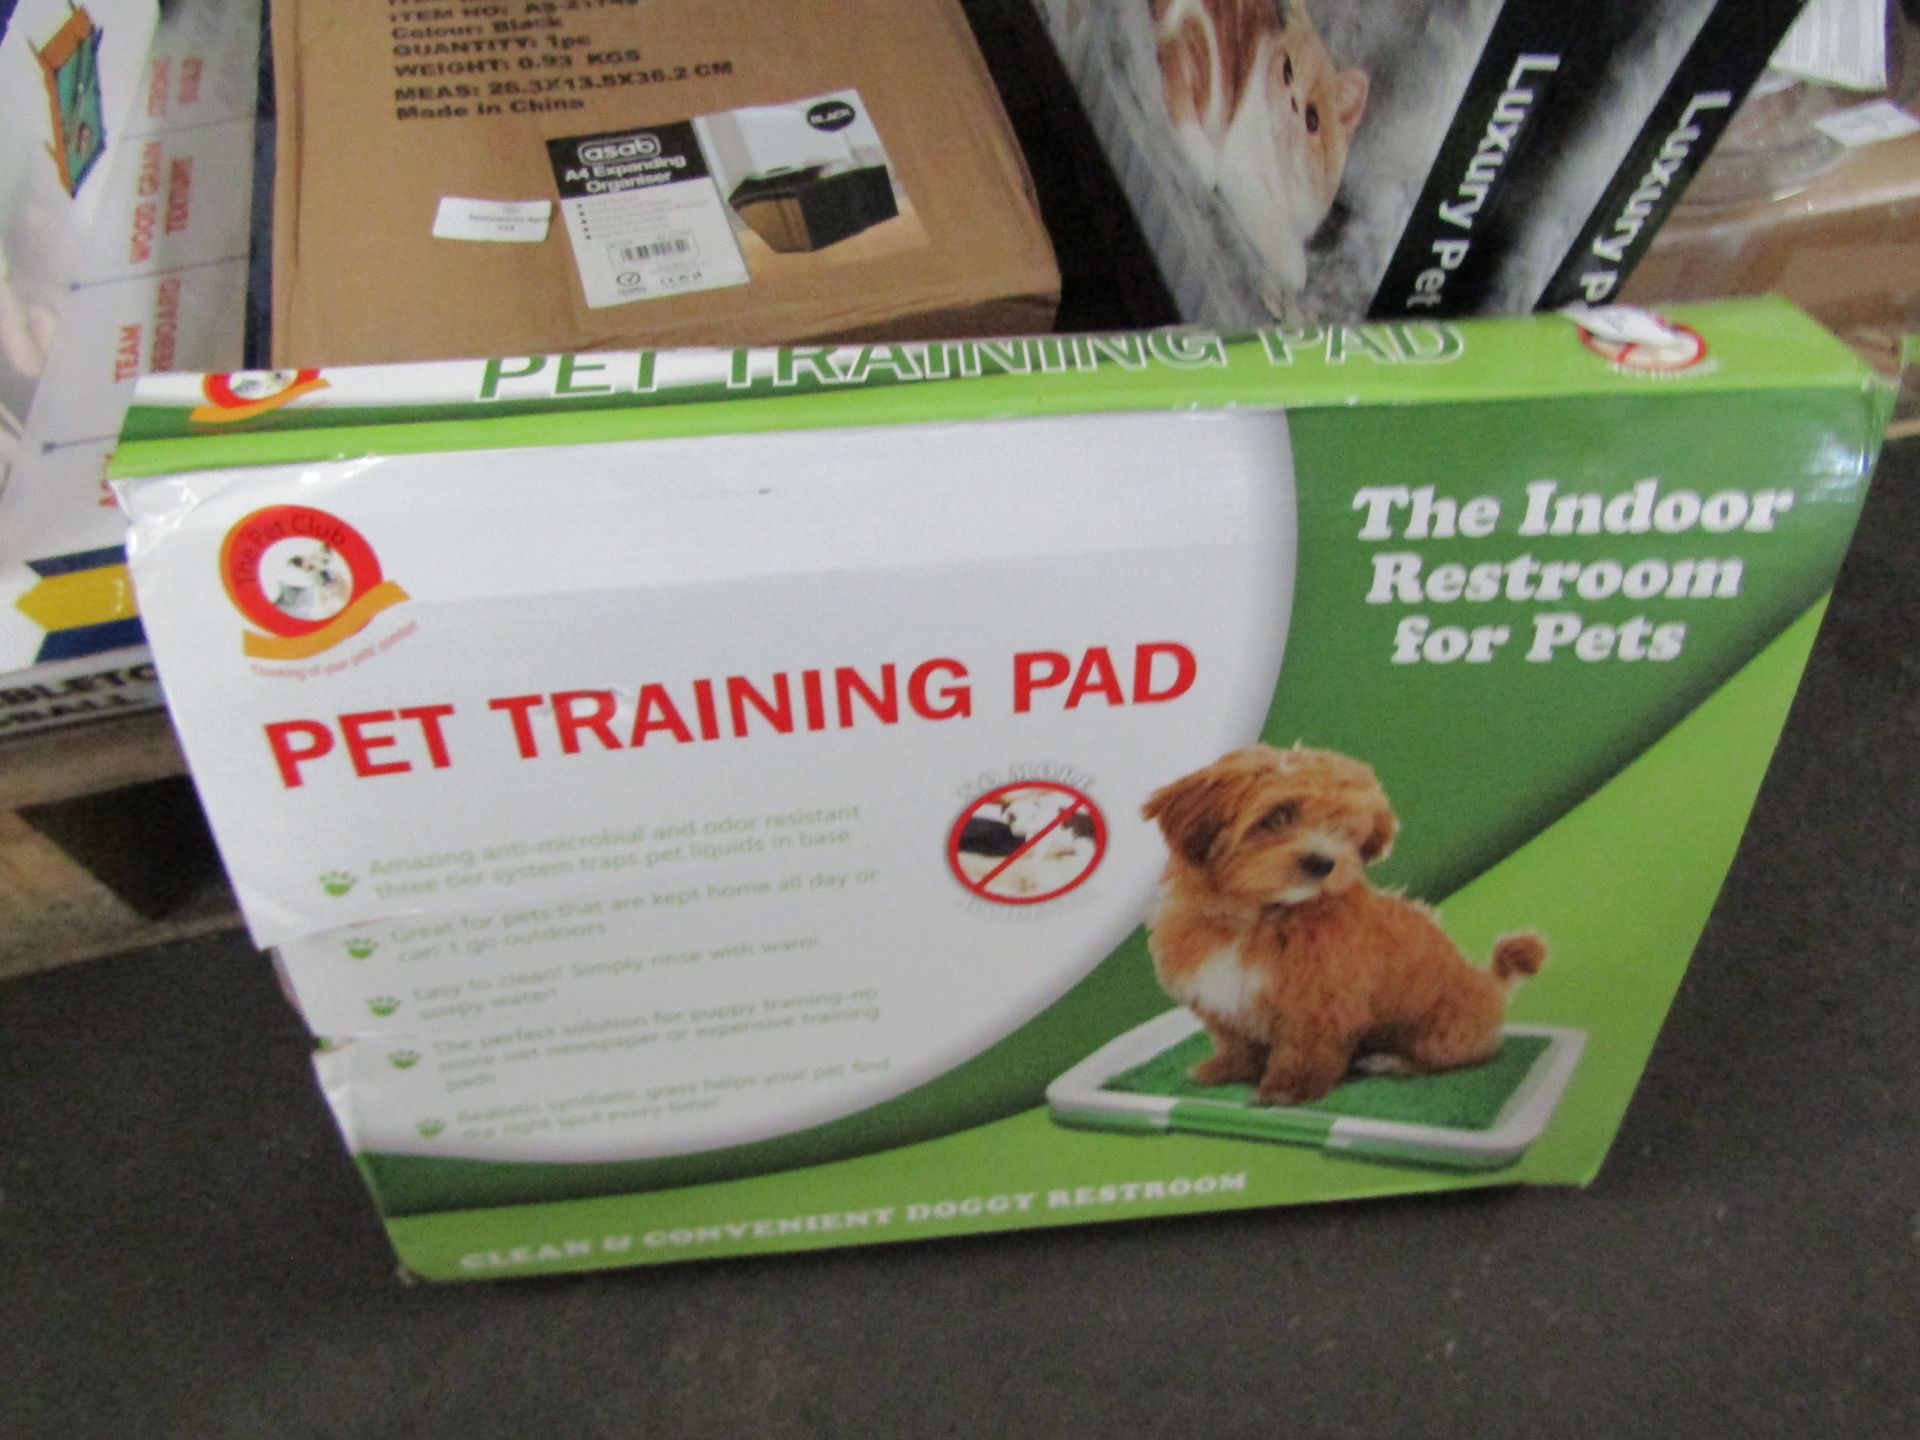 Pet training pad, unchecked and boxed